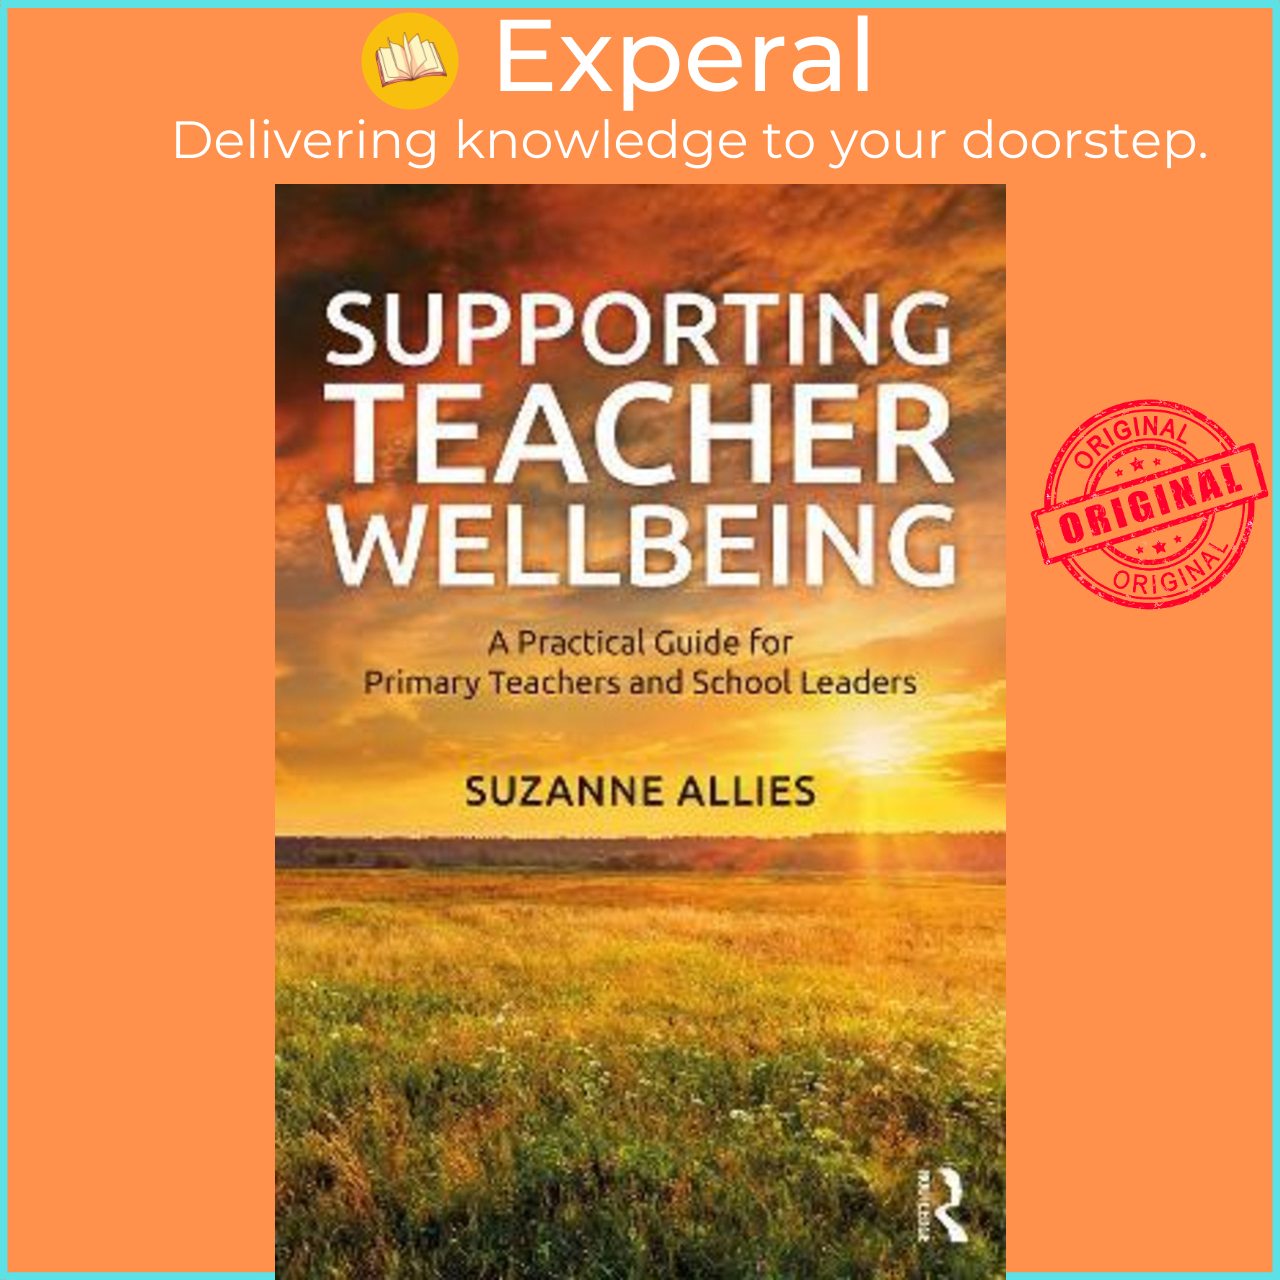 Wellbeing　Guide　A　Practical　Teacher　and　by　Lazada　Primary　(UK　Suzanne　Teachers　edition,　paperback)　for　Allies　Scho　Supporting　Singapore